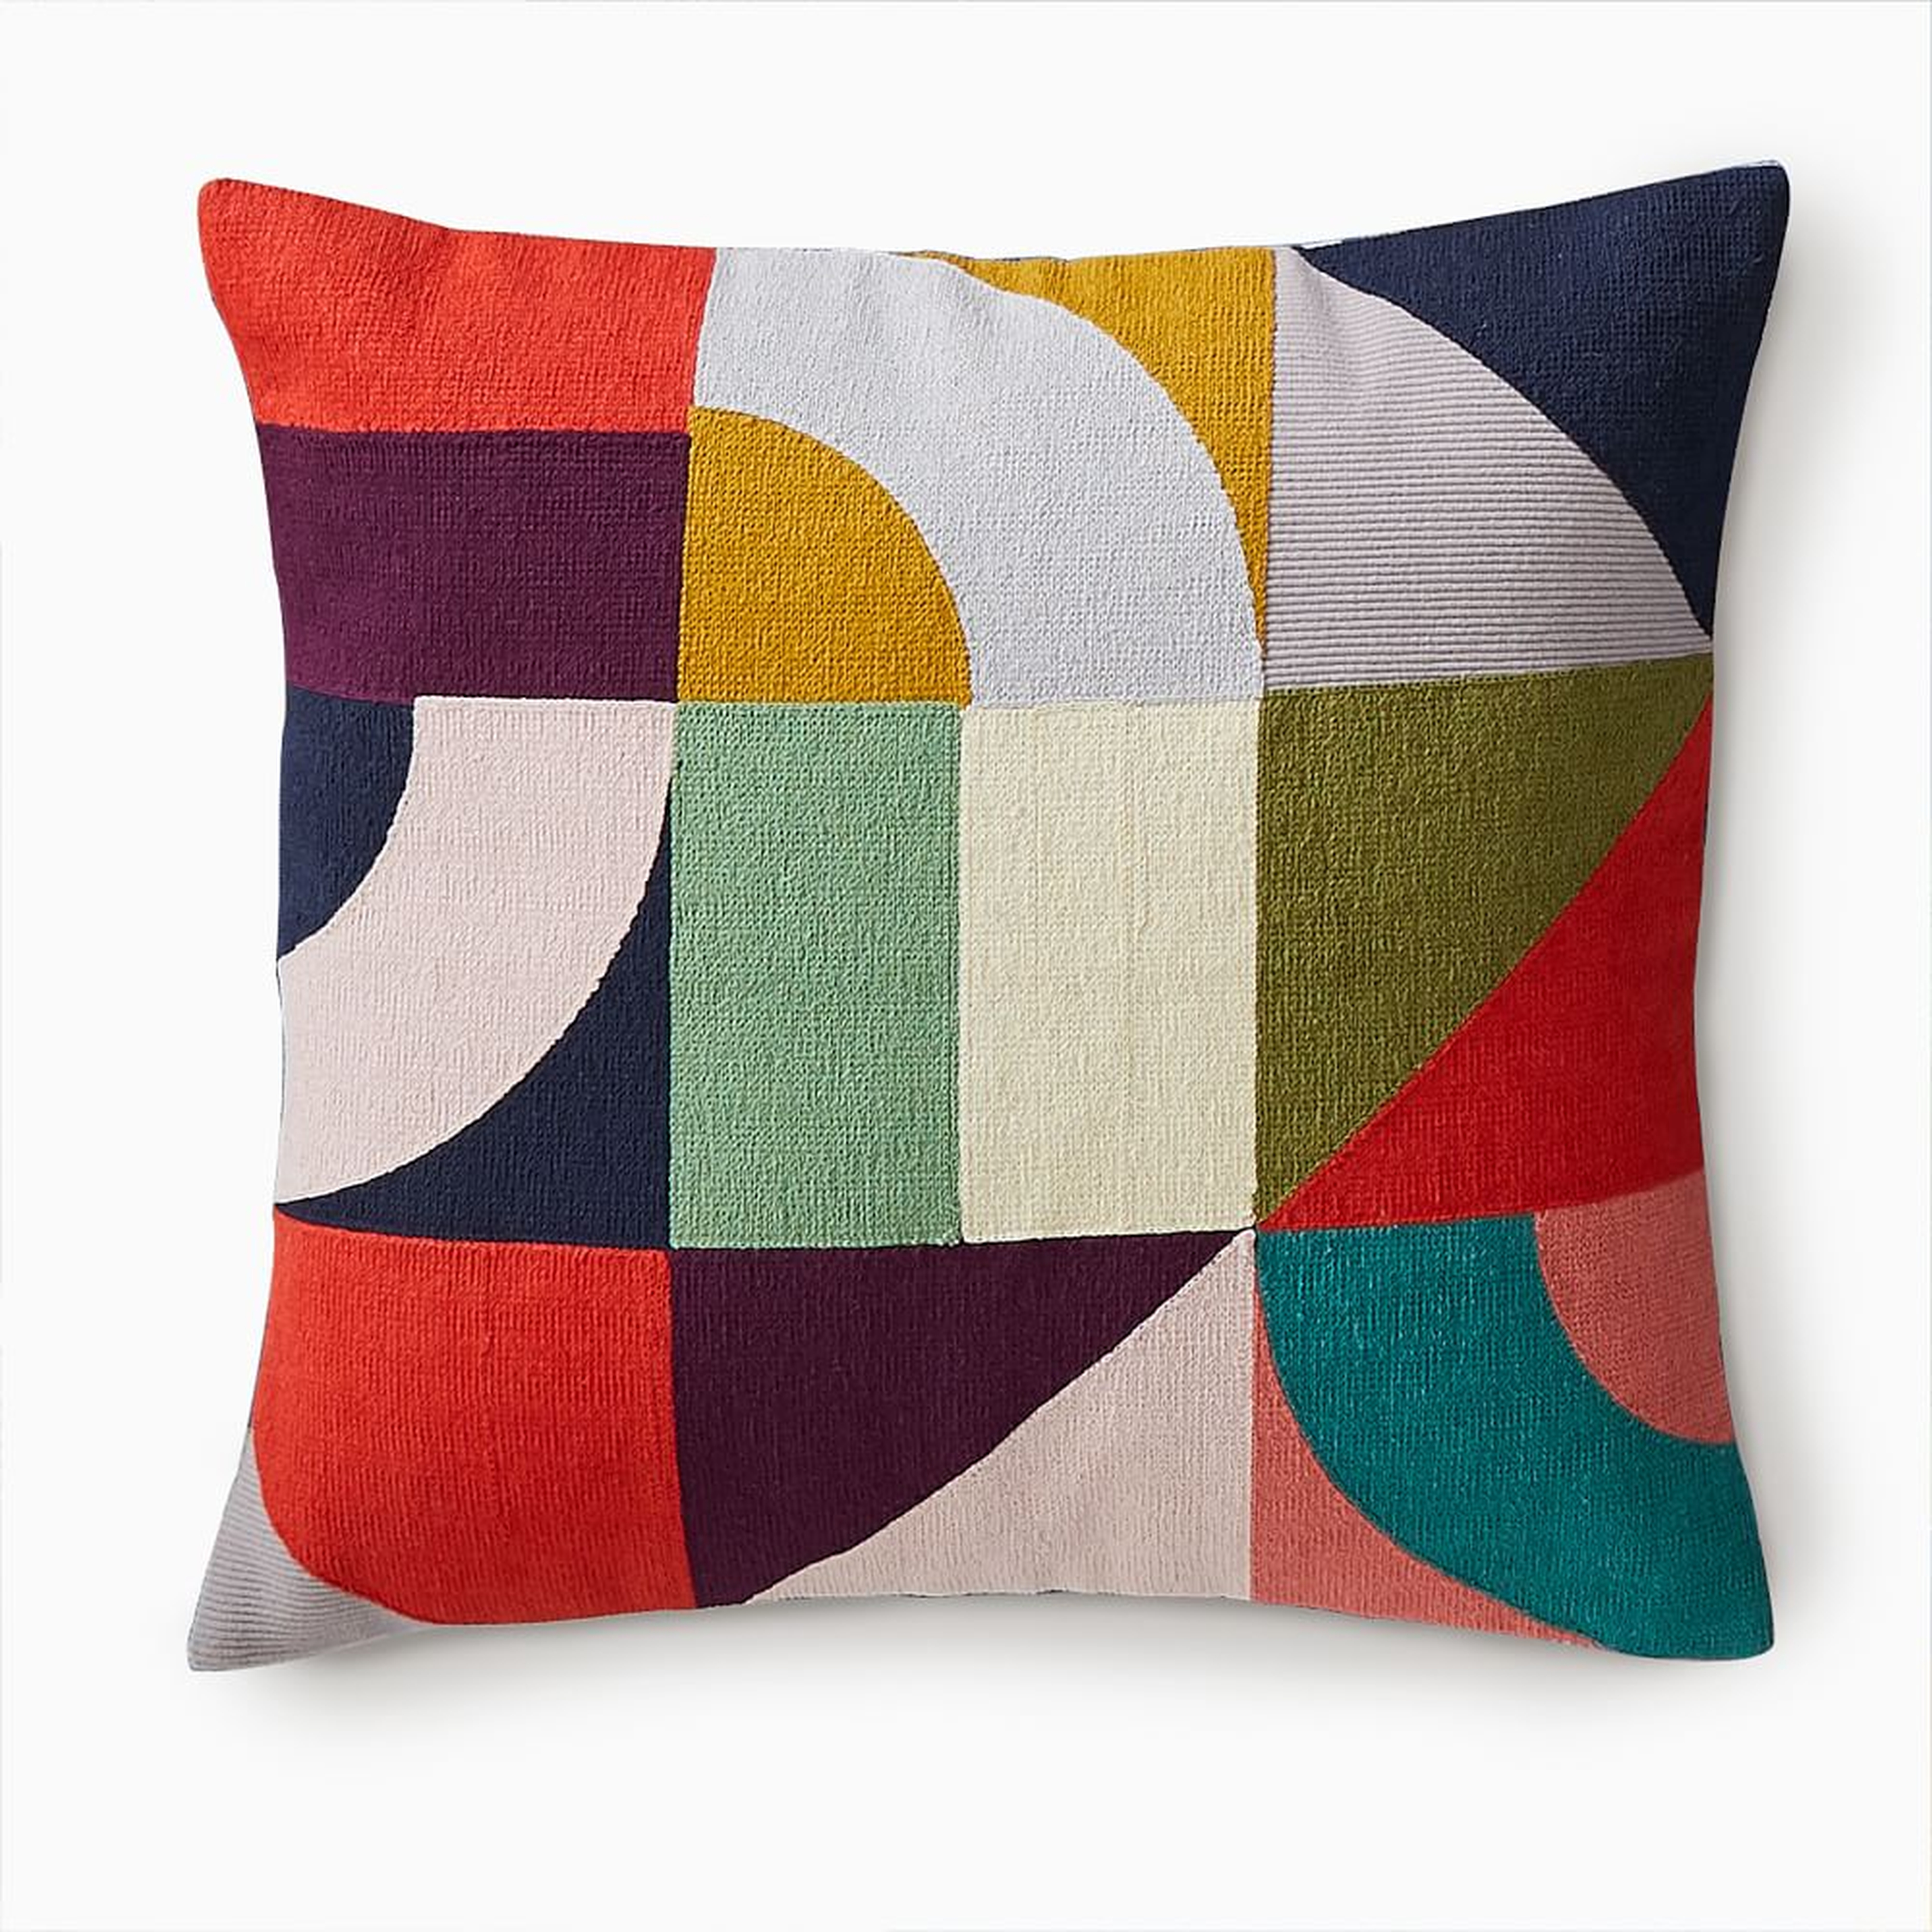 Margo Selby Puzzle Geo Pillow Cover, 20"x20", Multi - West Elm